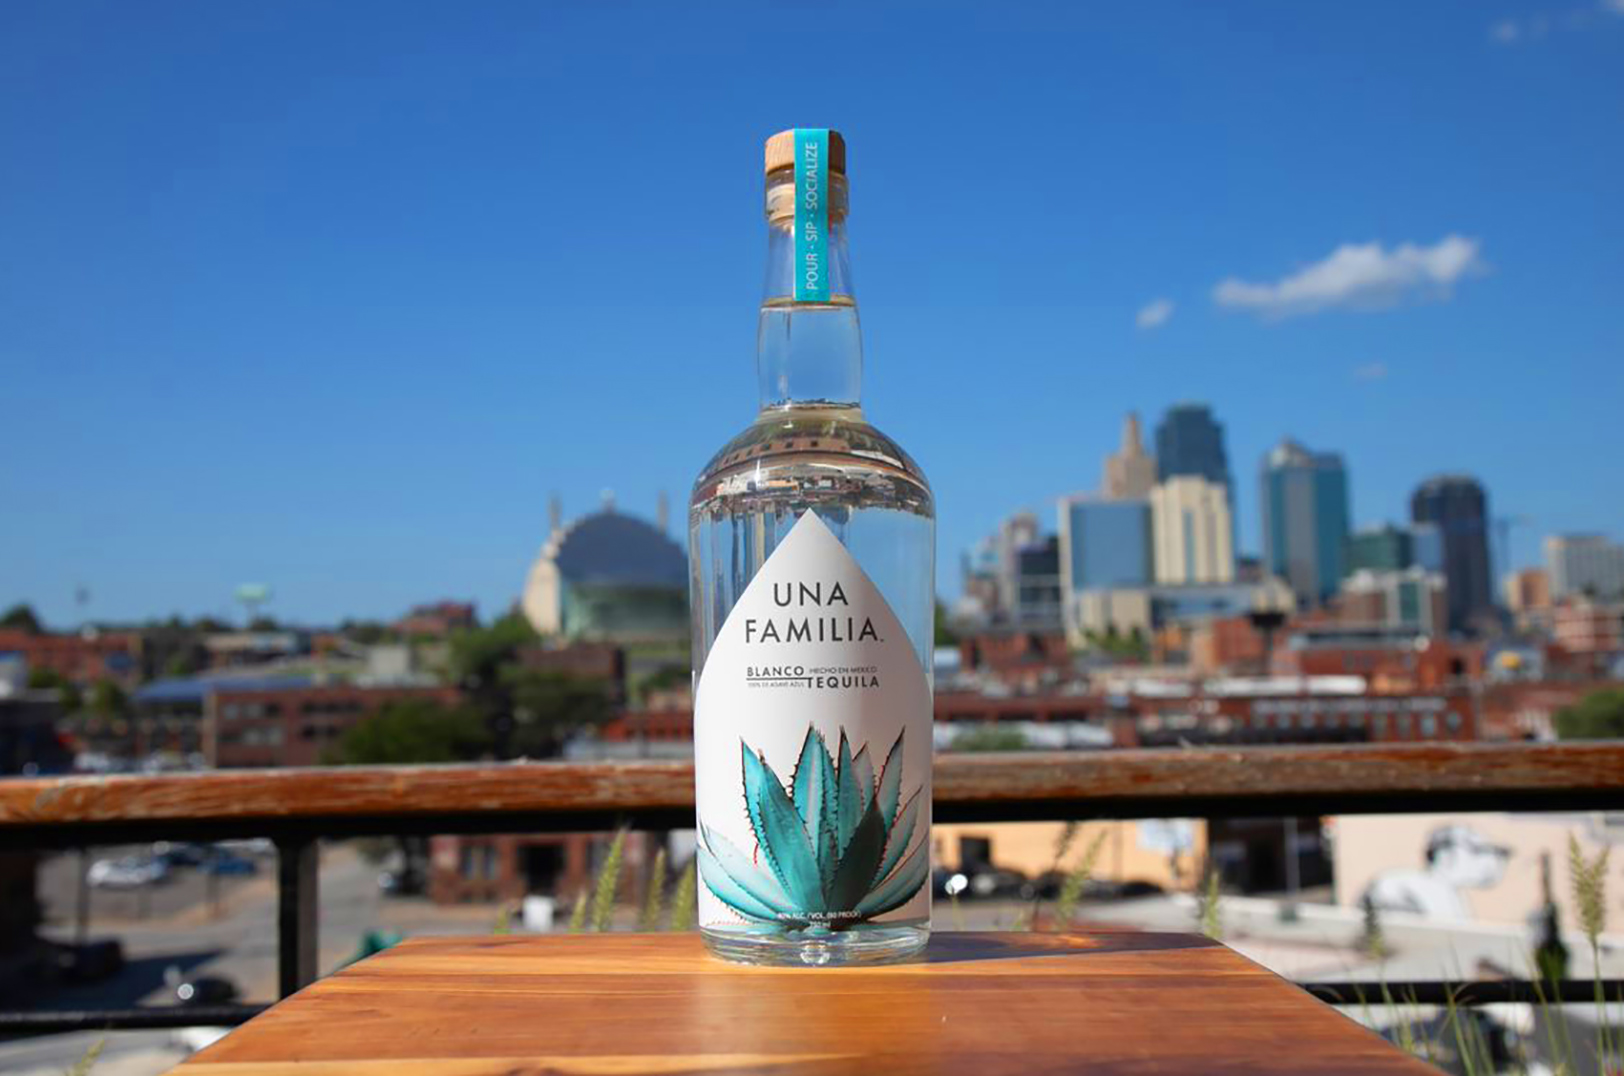 New tequila, same family: Why you’ll miss all the shots you don’t take of this soon-to-be iconic KC spirit